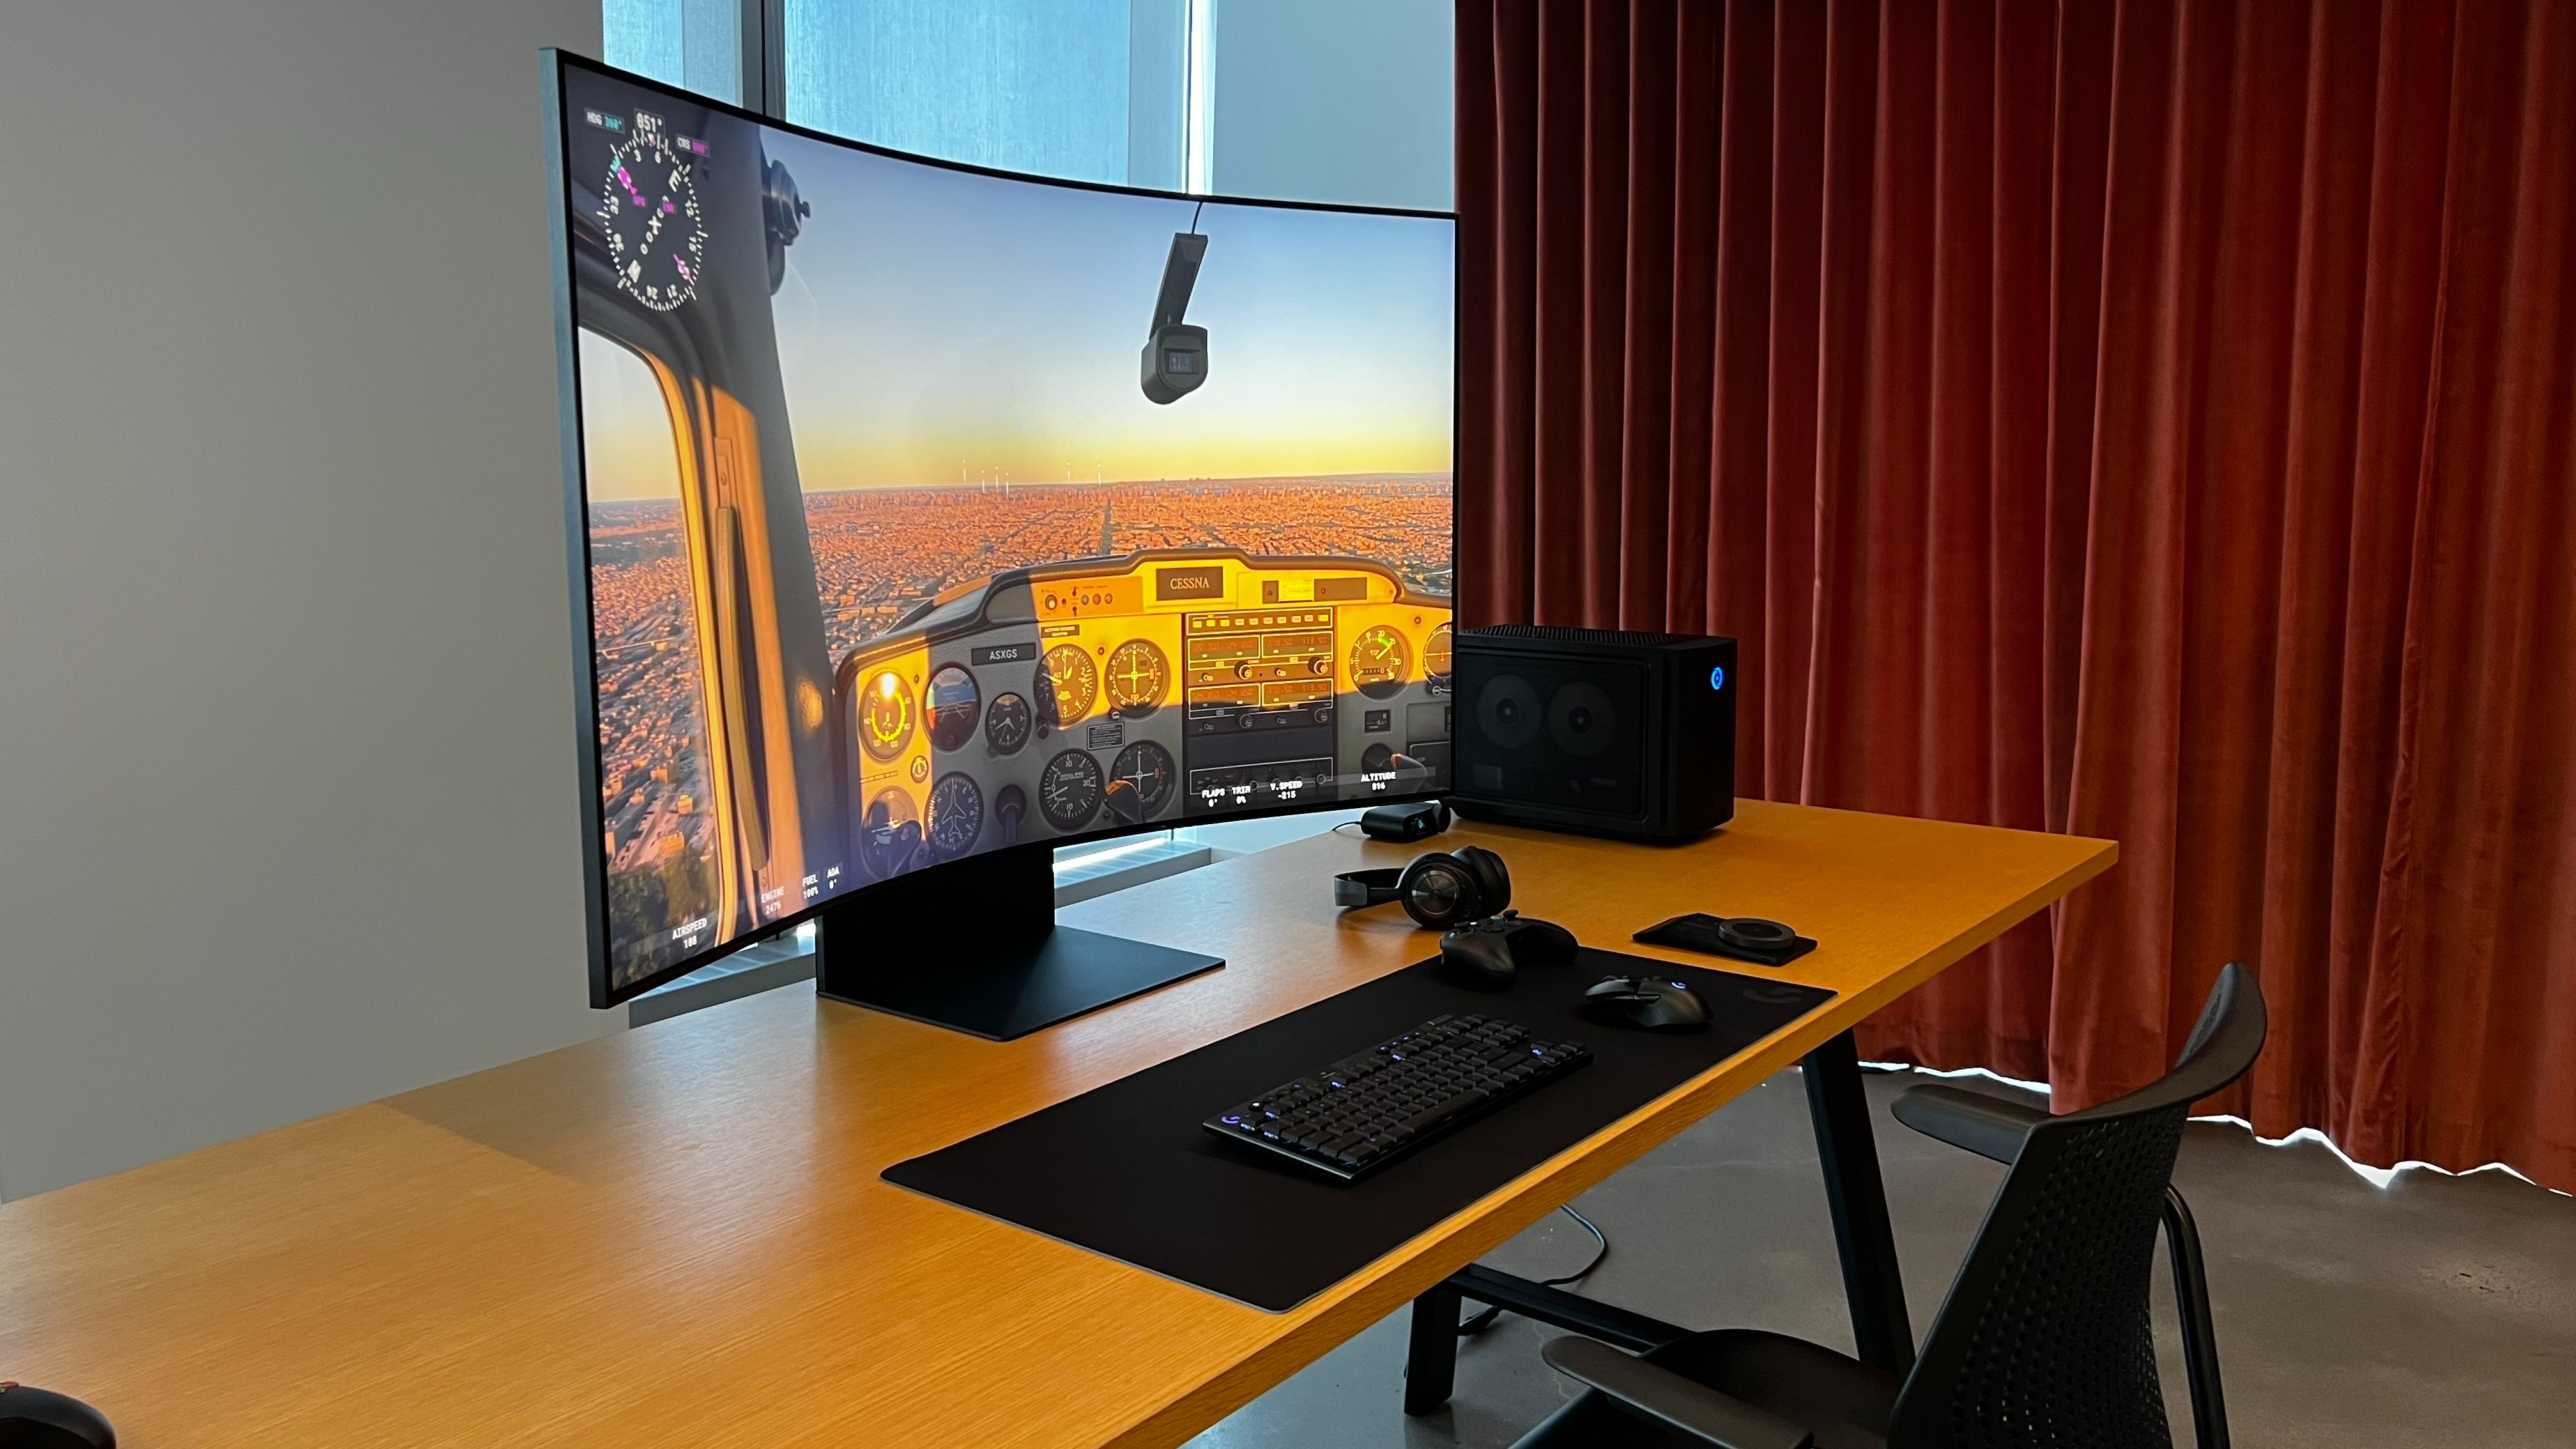 Odyssey Ark Gaming Monitor with MS Flight Sim on it.